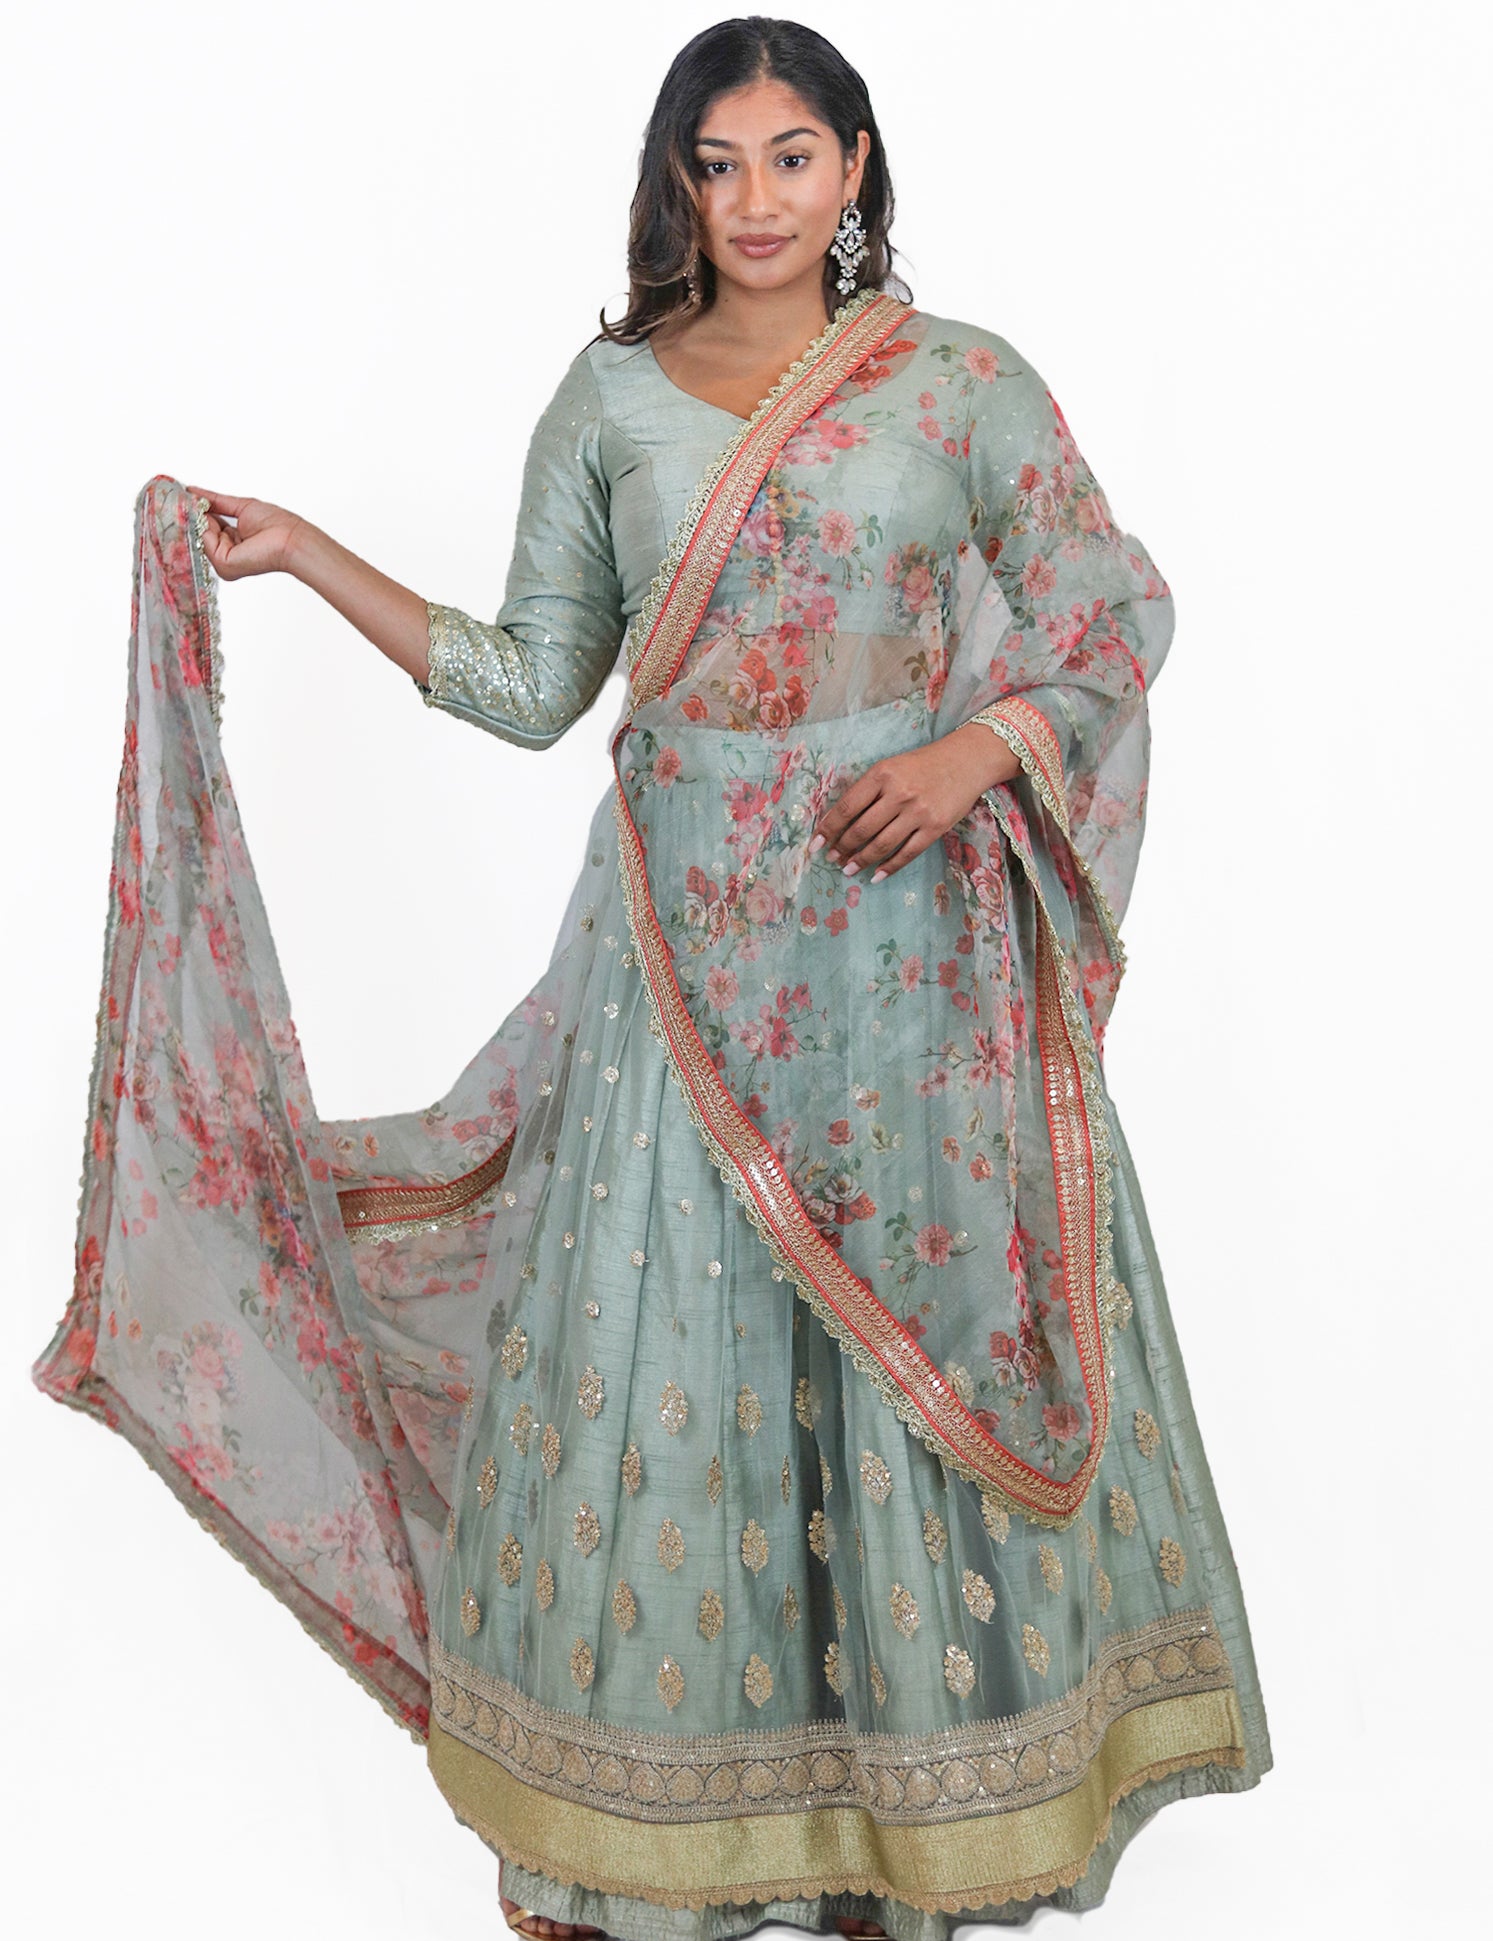 Rent Mint Green Lehenga and Blouse with Floral Dupatta